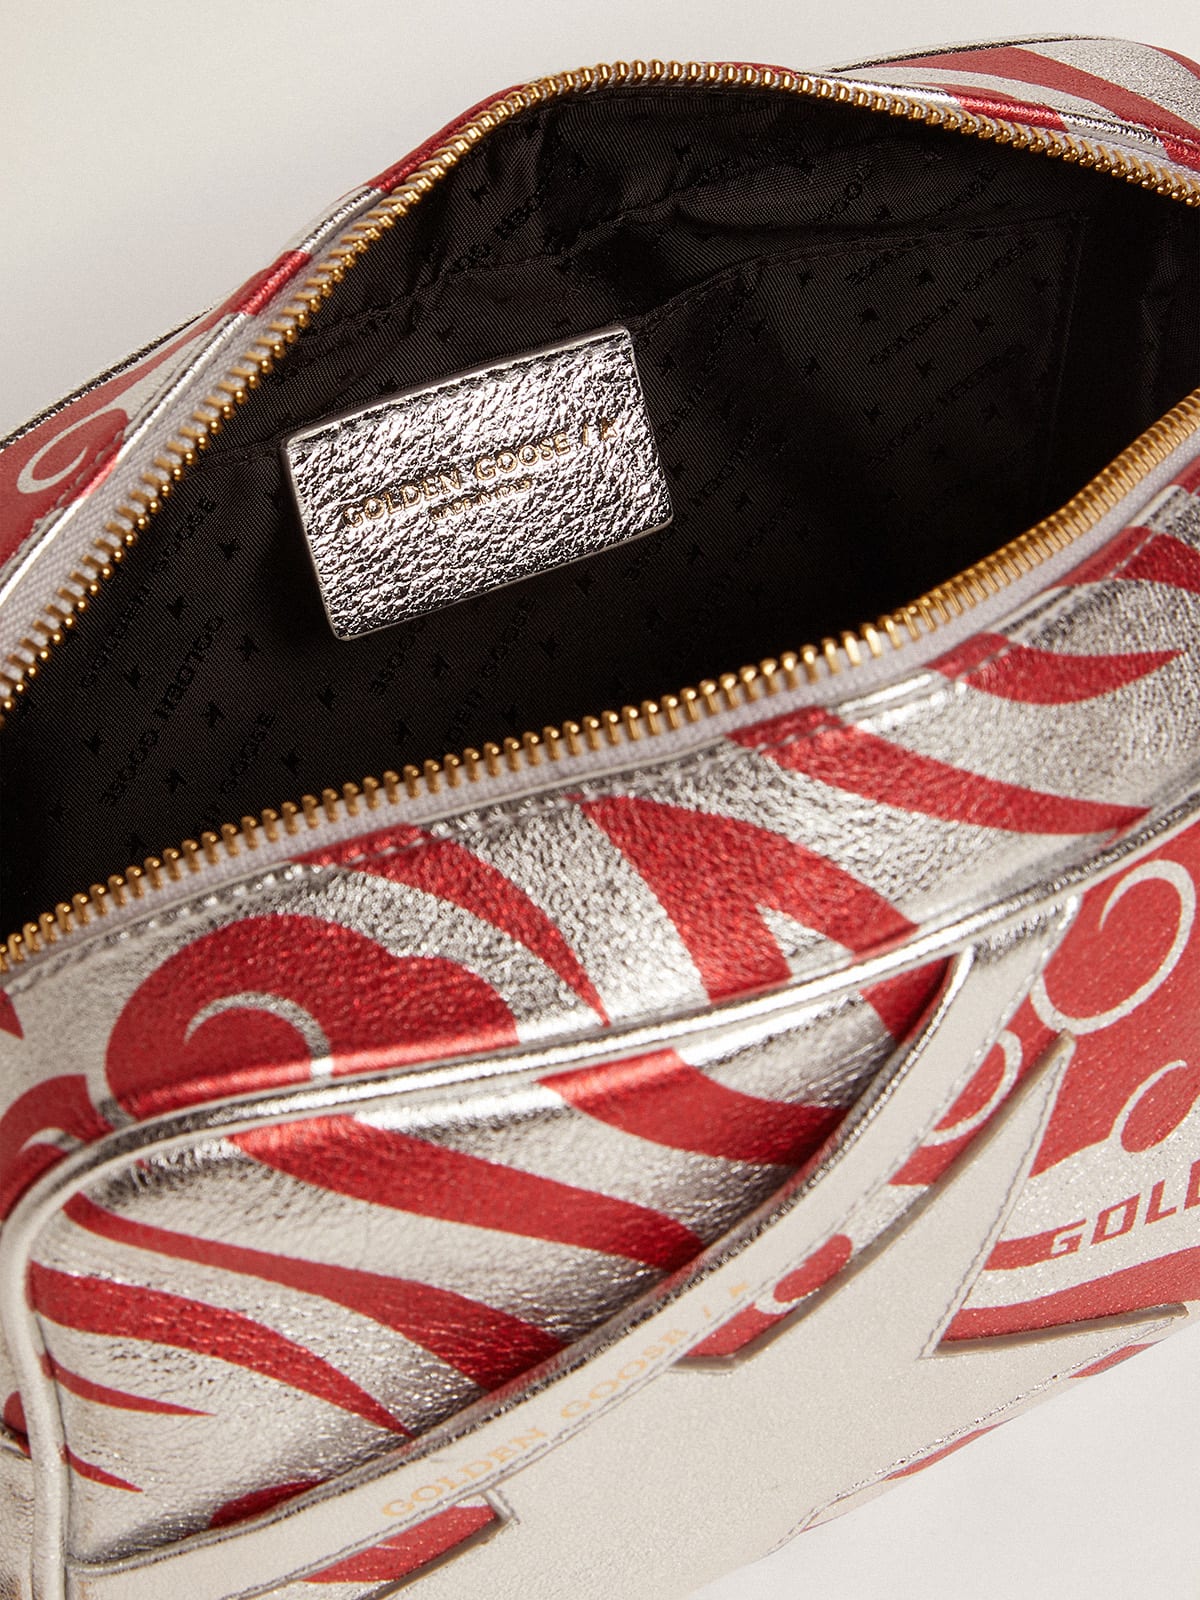 Golden Goose - Star Bag in silver-colored laminated leather with tone-on-tone star and red tiger-striped CNY print in 